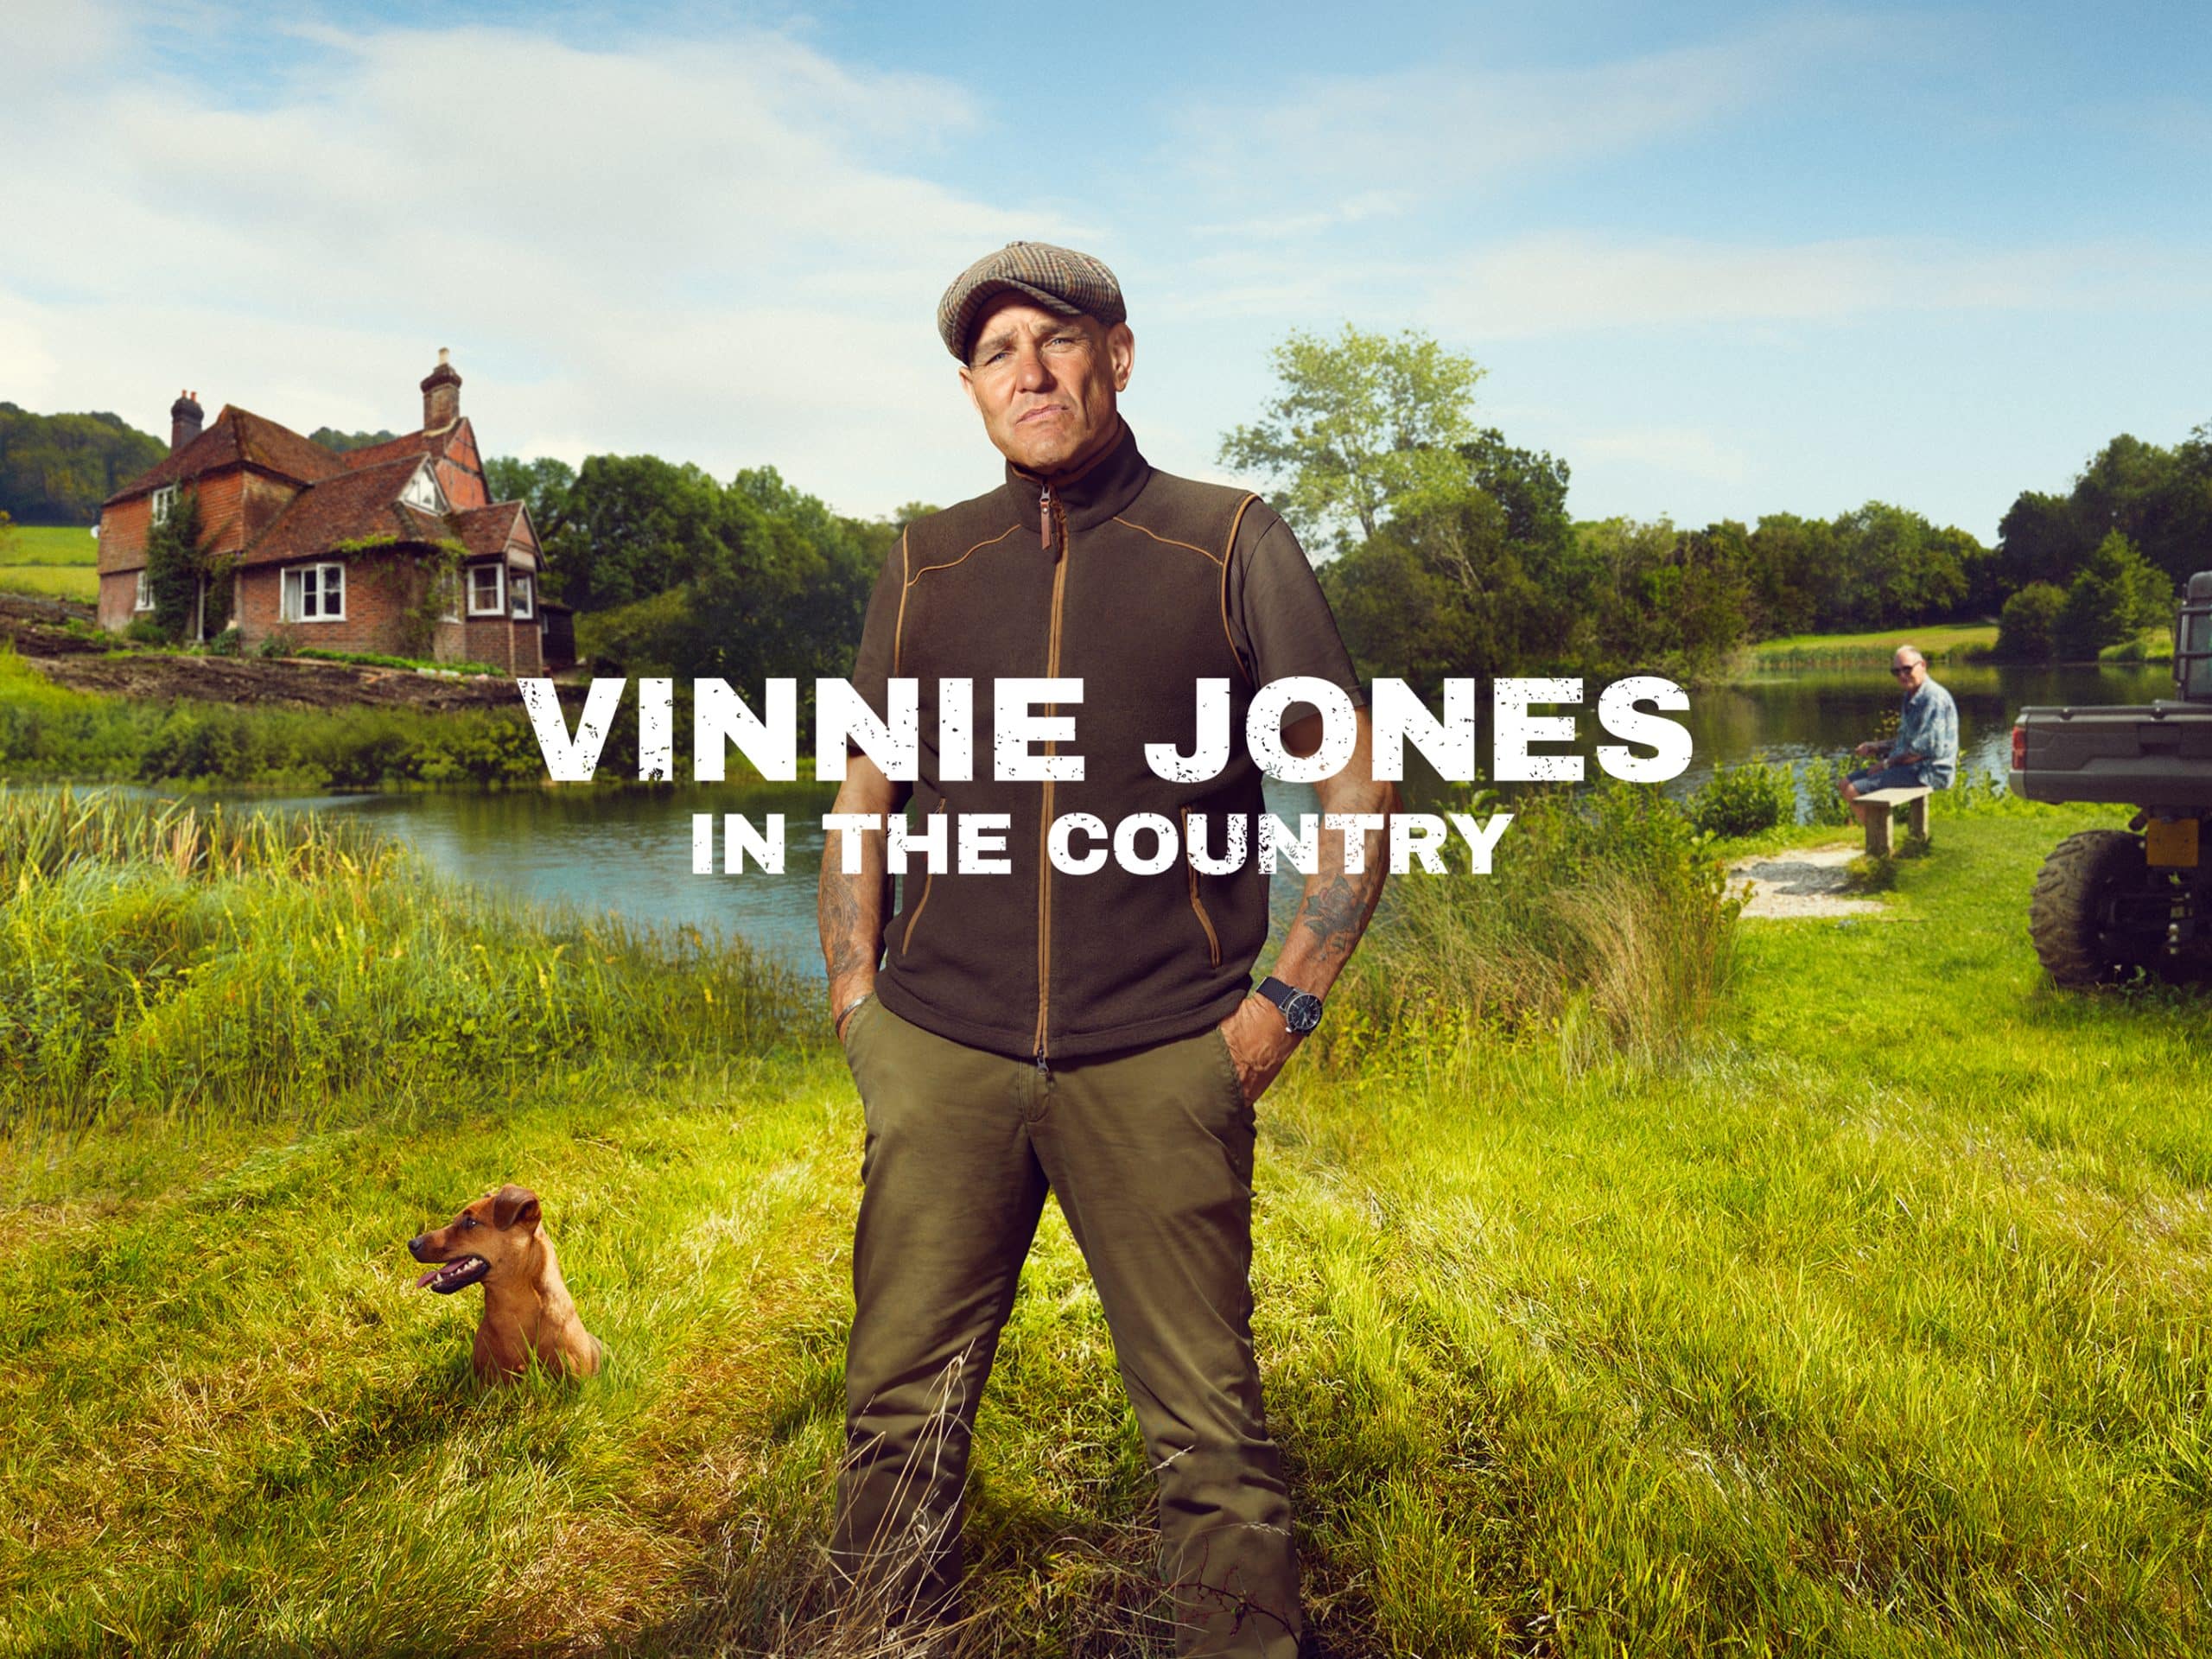 FIRST LOOK: Hollywood Hardman Vinnie Jones is at One with Nature in the Trailer for His New Series, Vinnie Jones In The Country.